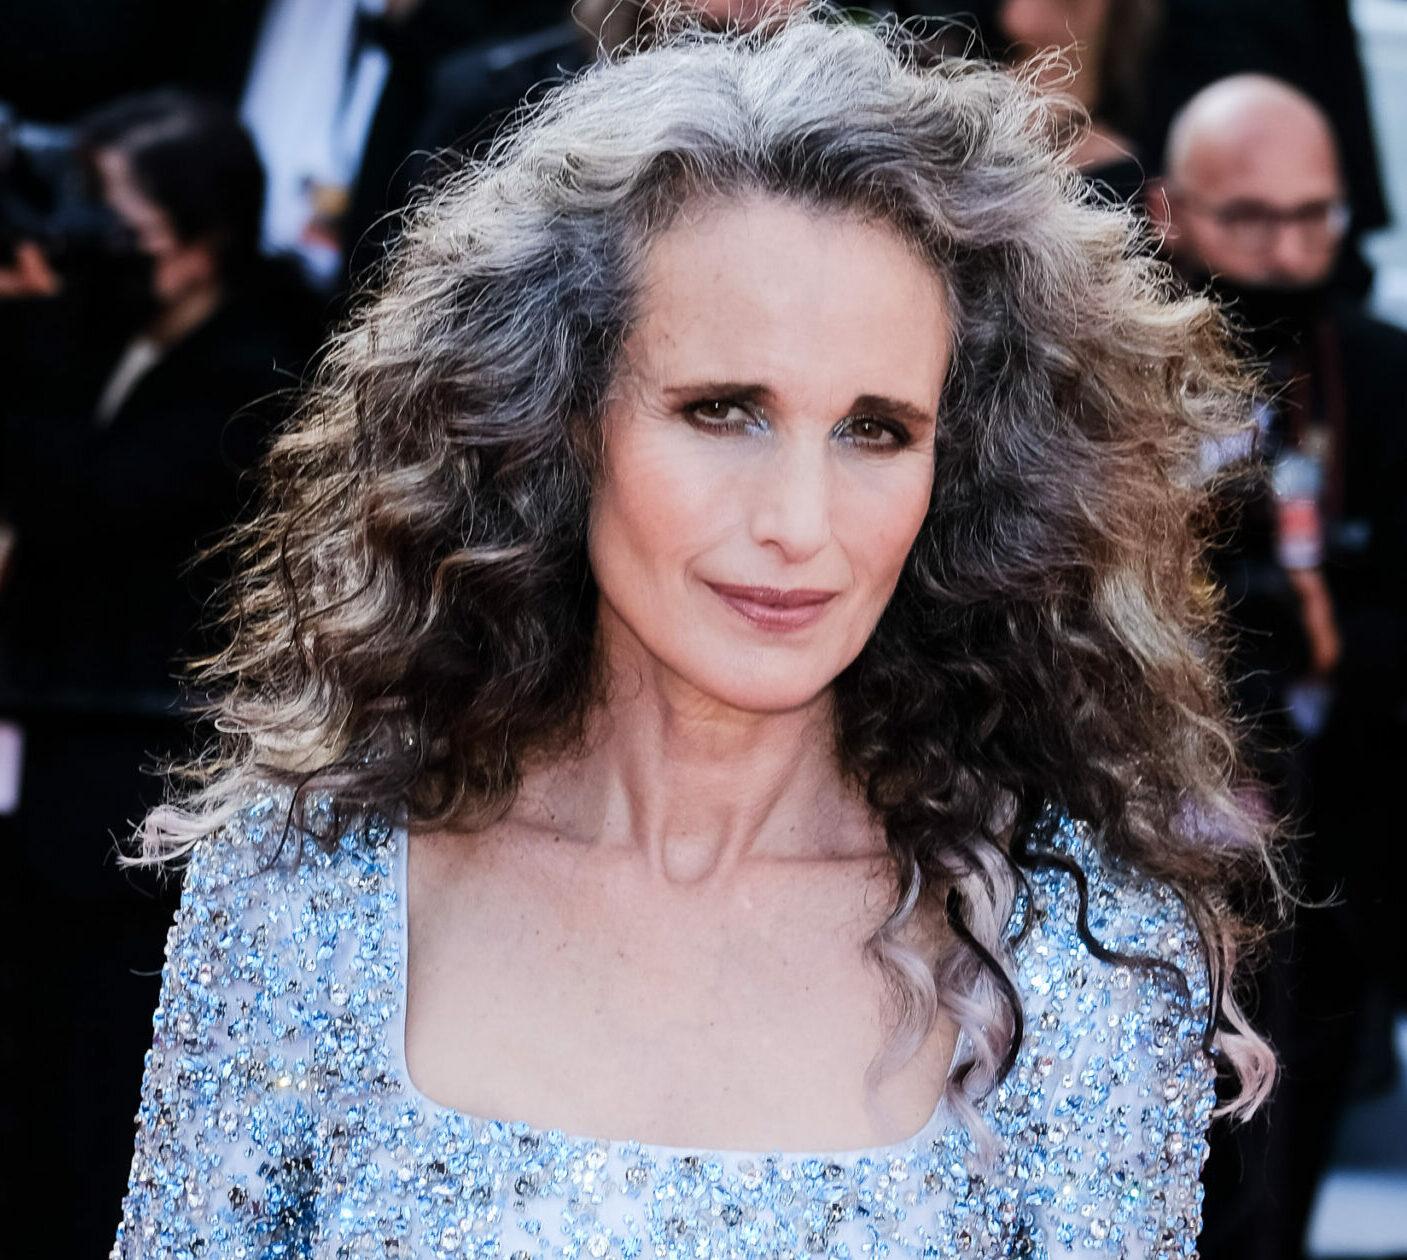 Andie MacDowell poses at the Red Carpet for the Opening Night Film - Annettee during the 74th Cannes International Film Festival on Tuesday 6 July 2021 at Palais des festivals, Cannes.